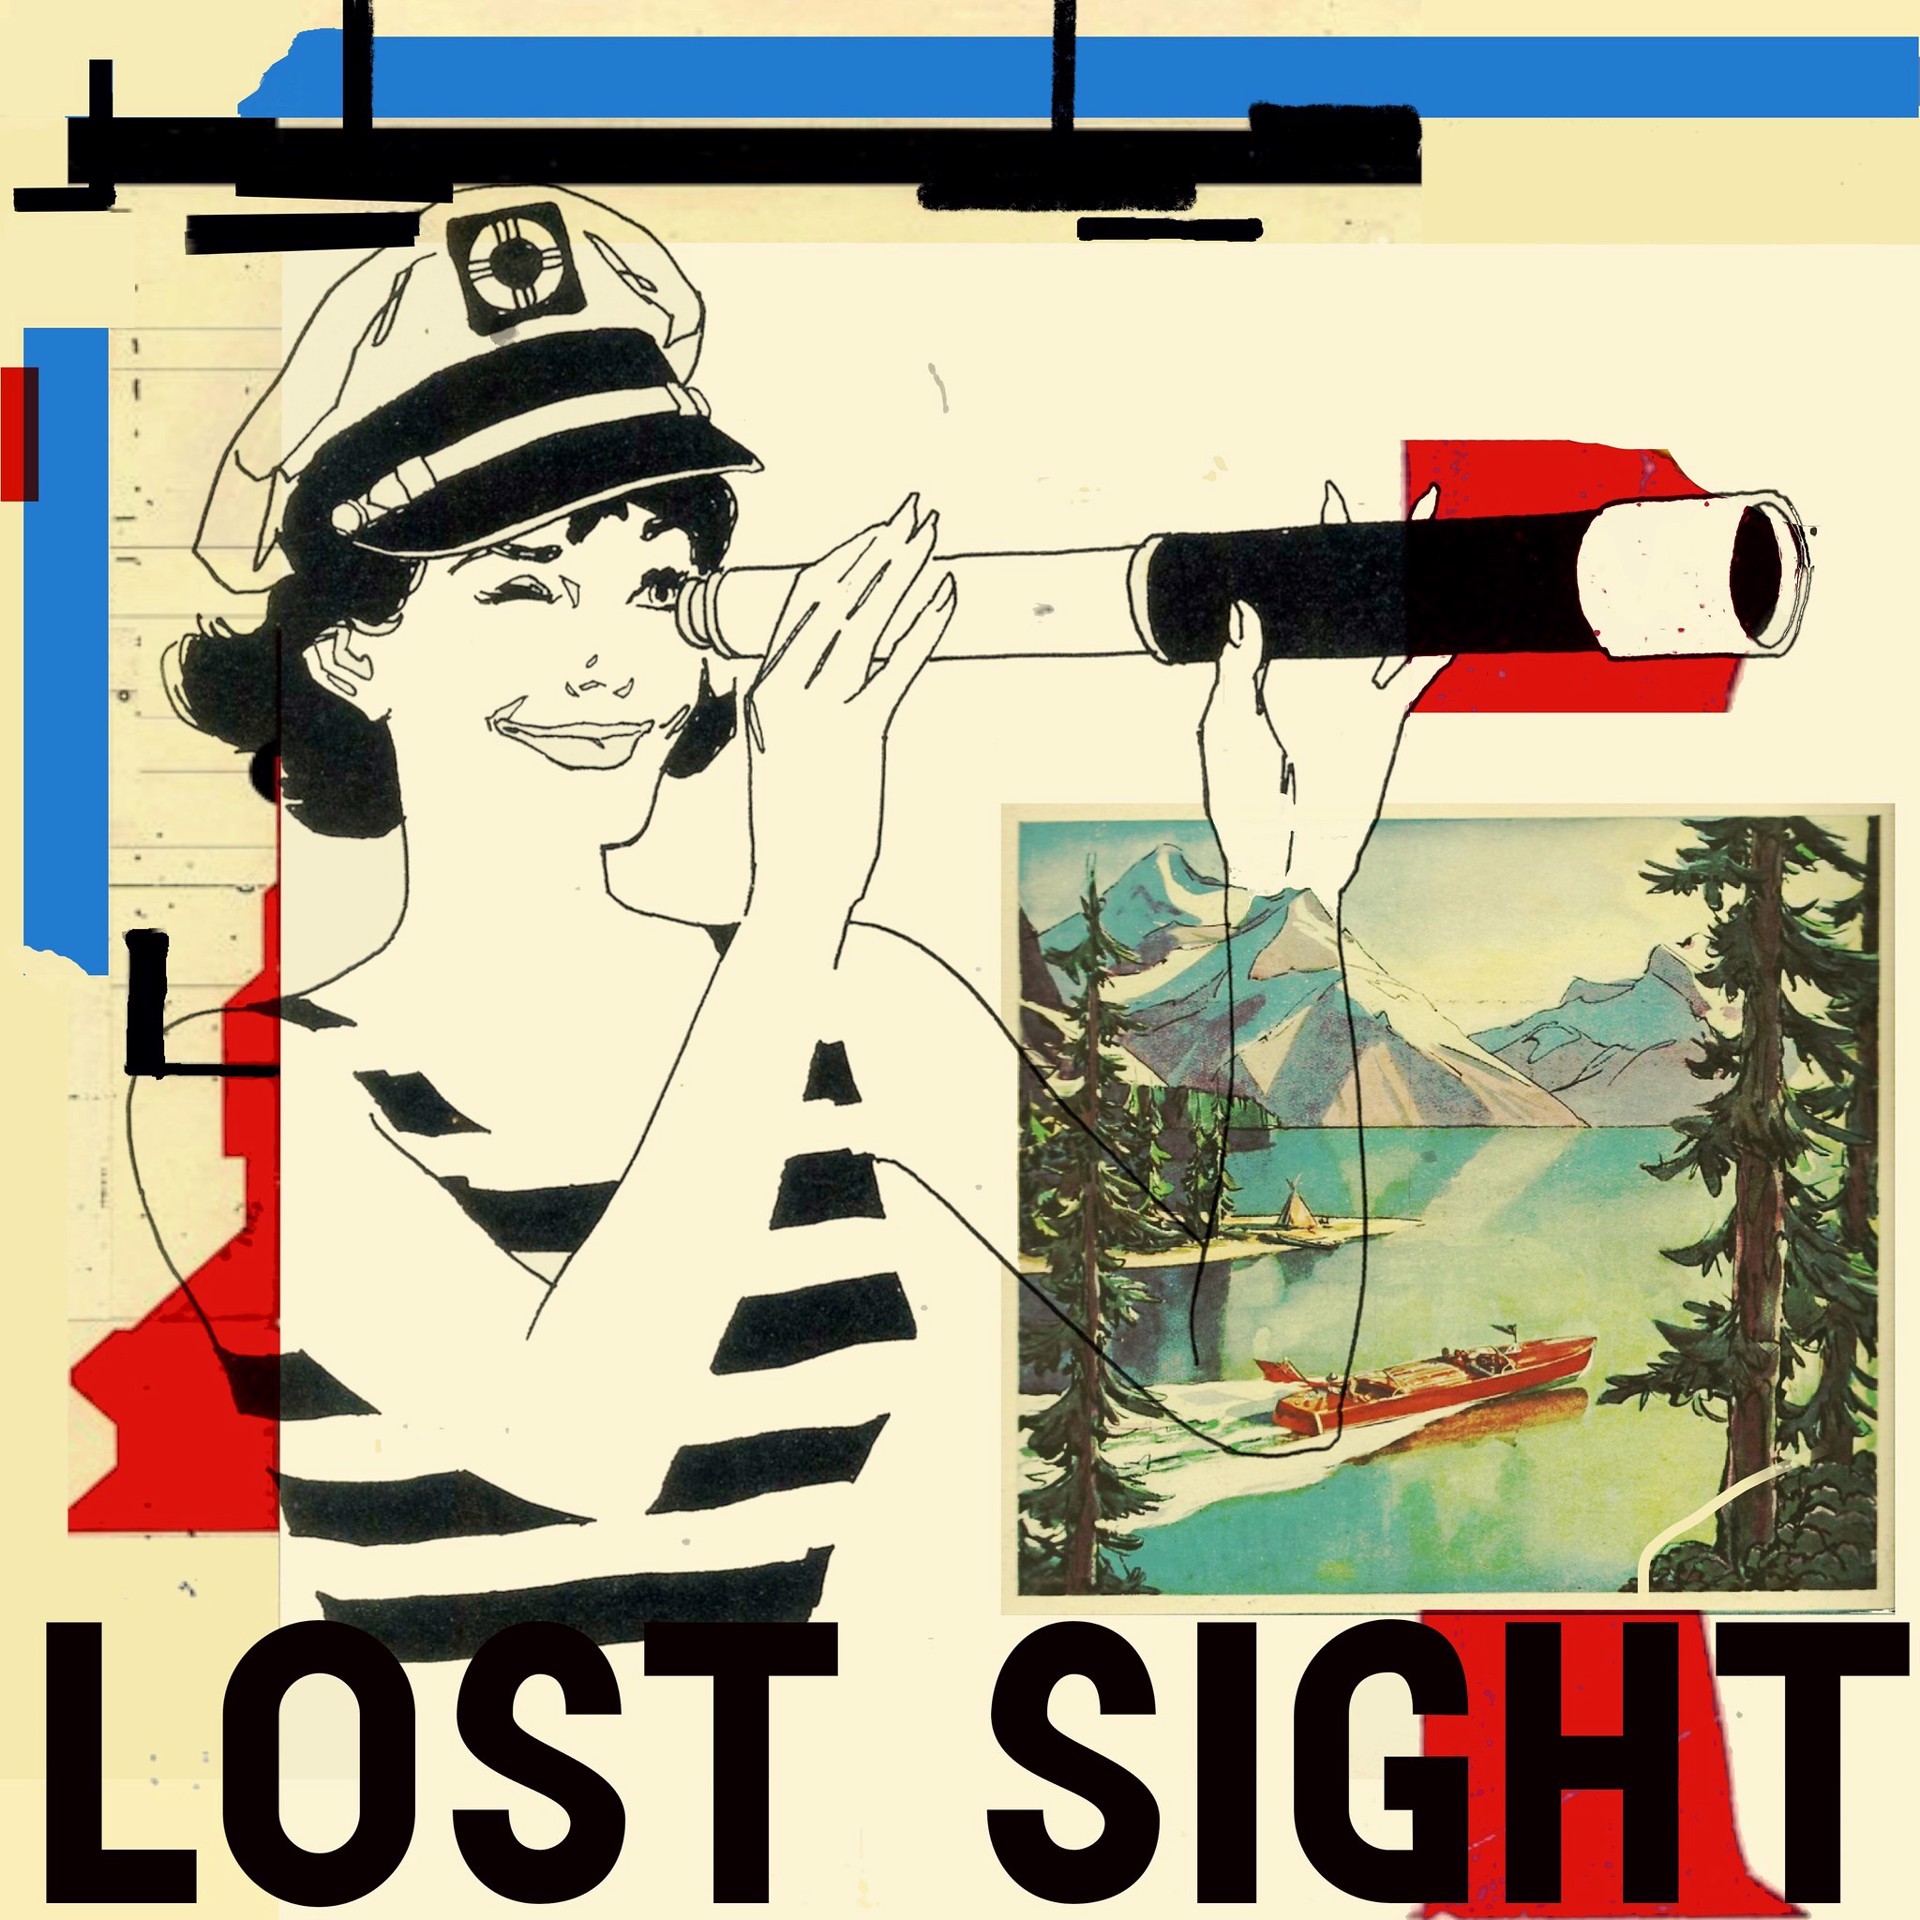 Lost Sight by Sarah Collier